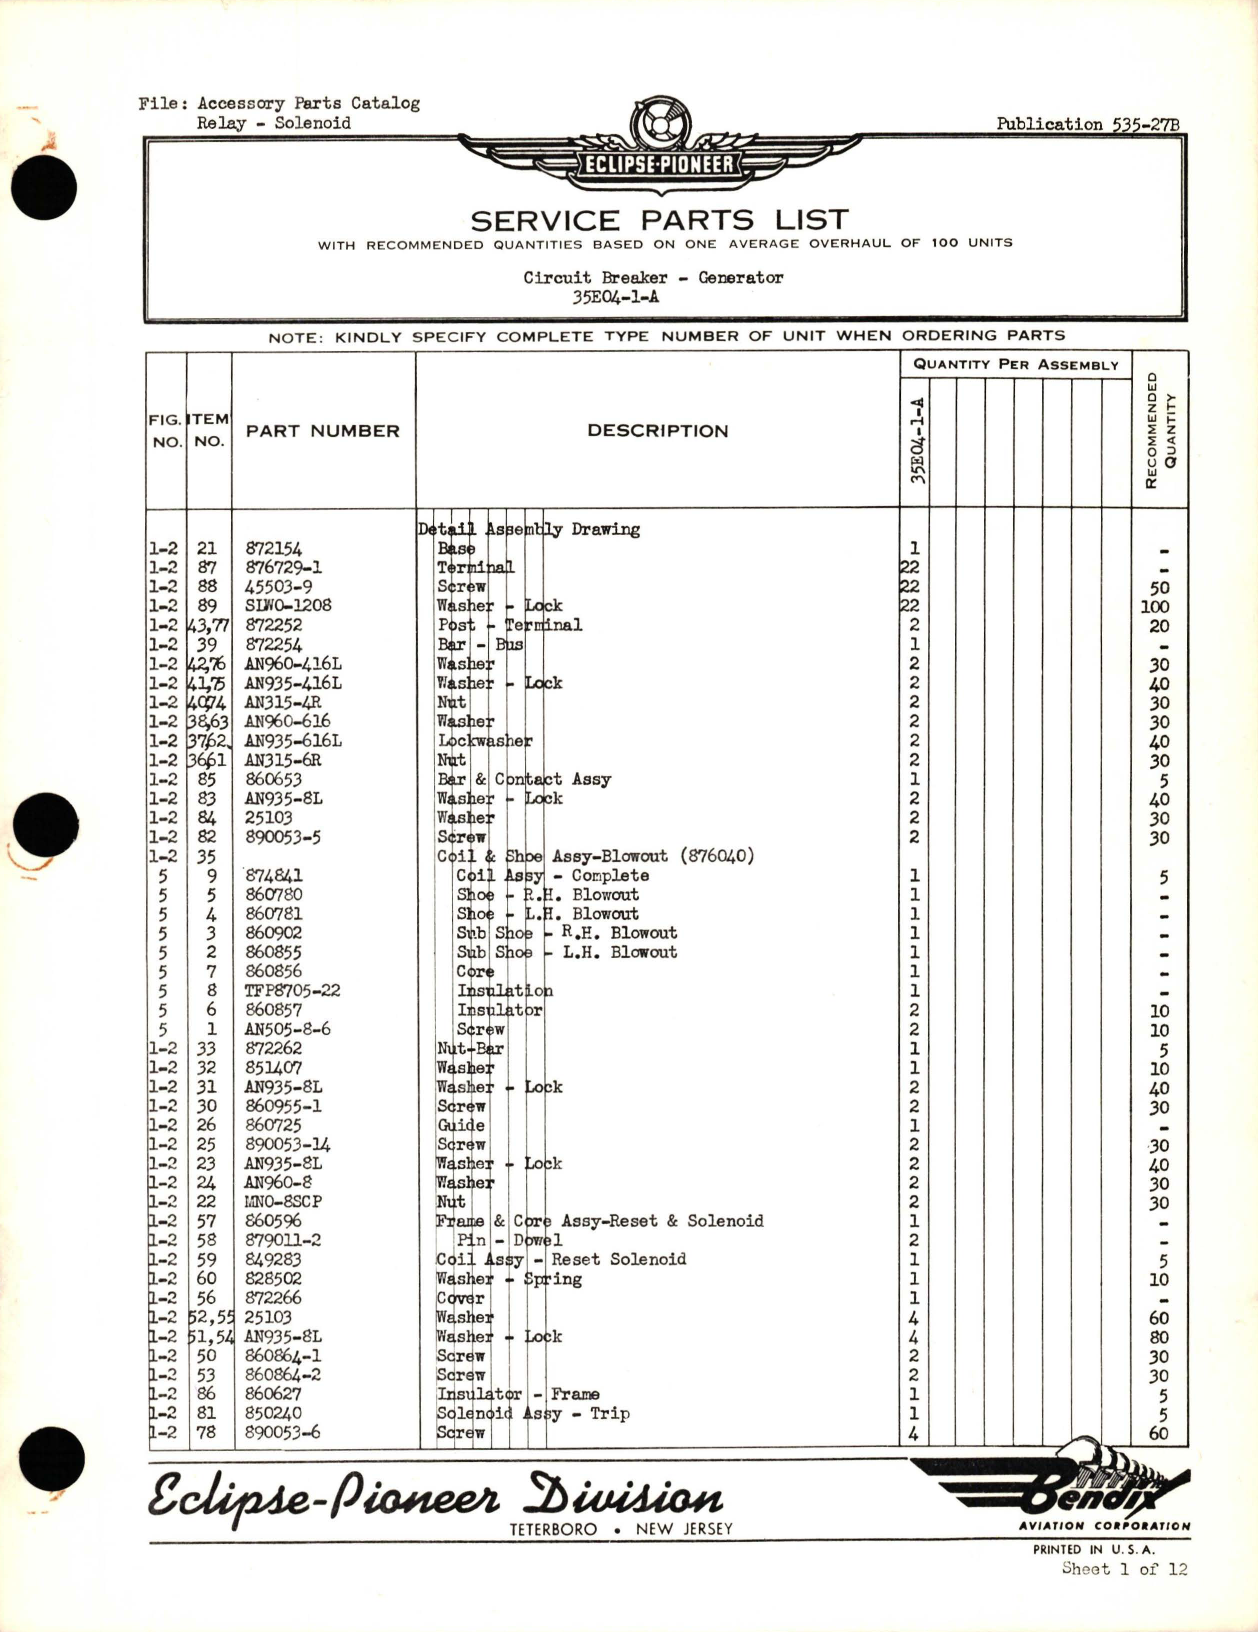 Sample page 1 from AirCorps Library document: Service Parts List for Circuit Breaker Generator - 35E04-1-4